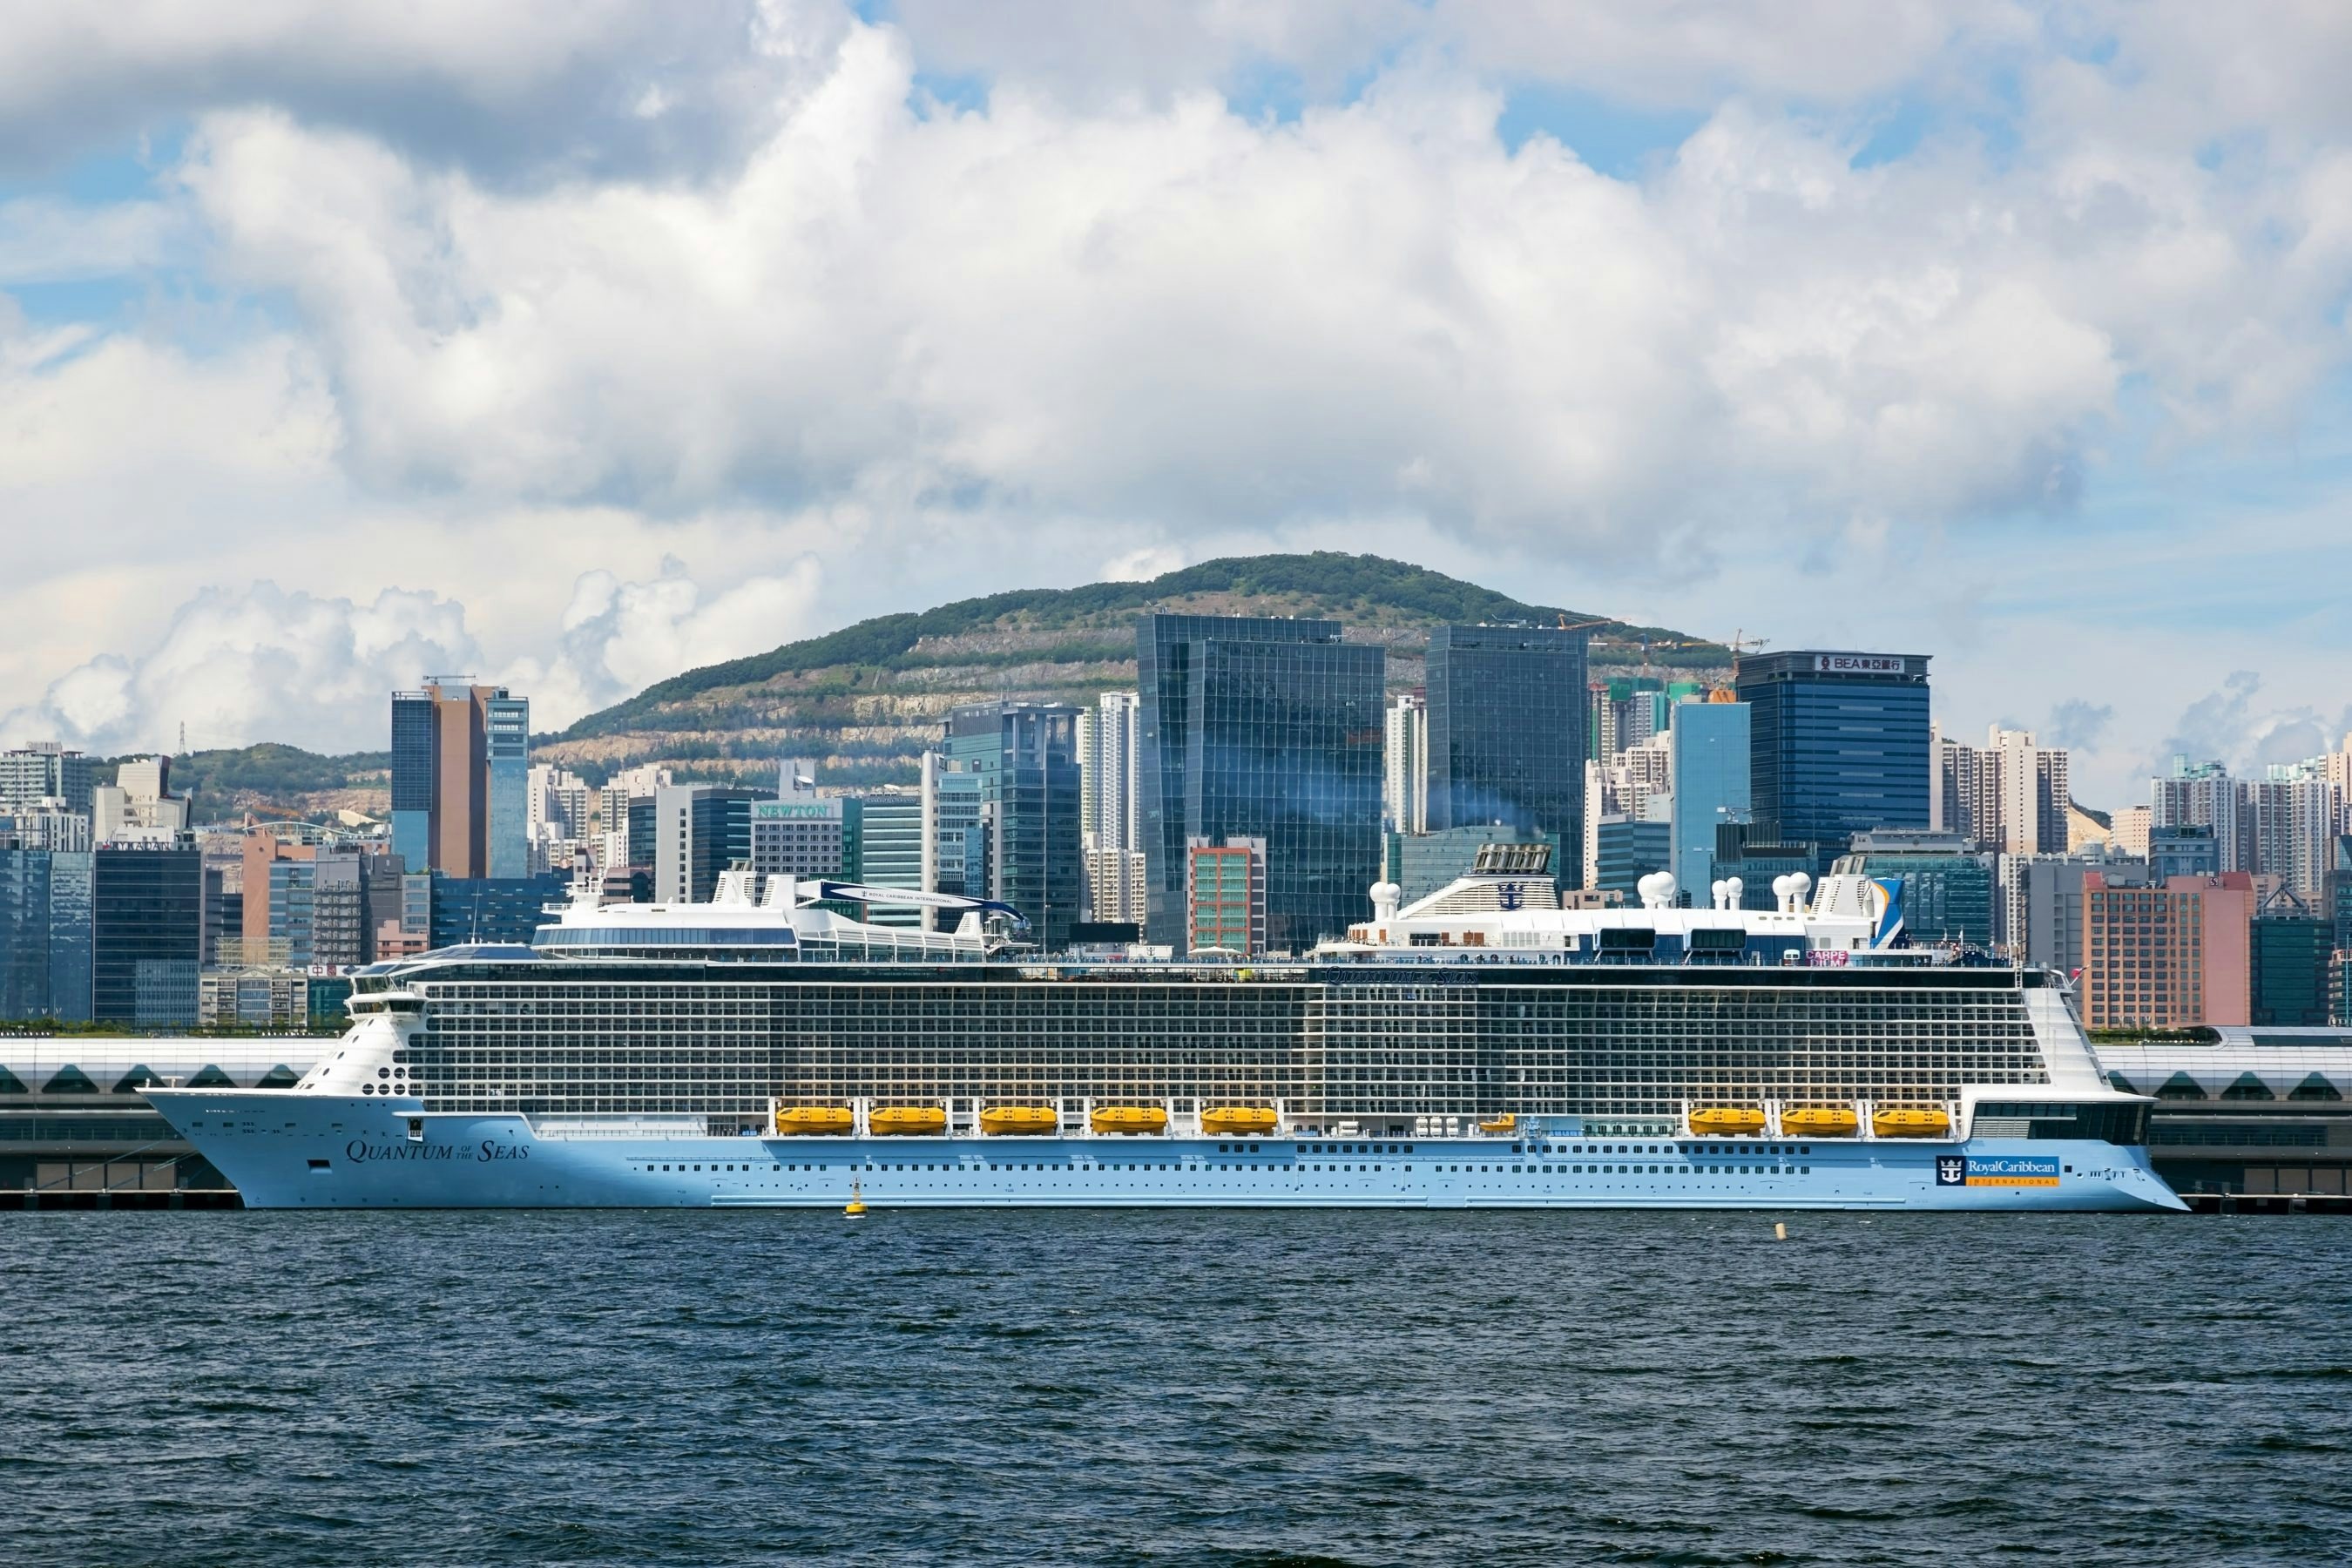 Royal Caribbean's Quantum of the Seas offers cruises throughout North Asia from its new homeport in Shanghai. (Daniel Fung / Shutterstock.com)